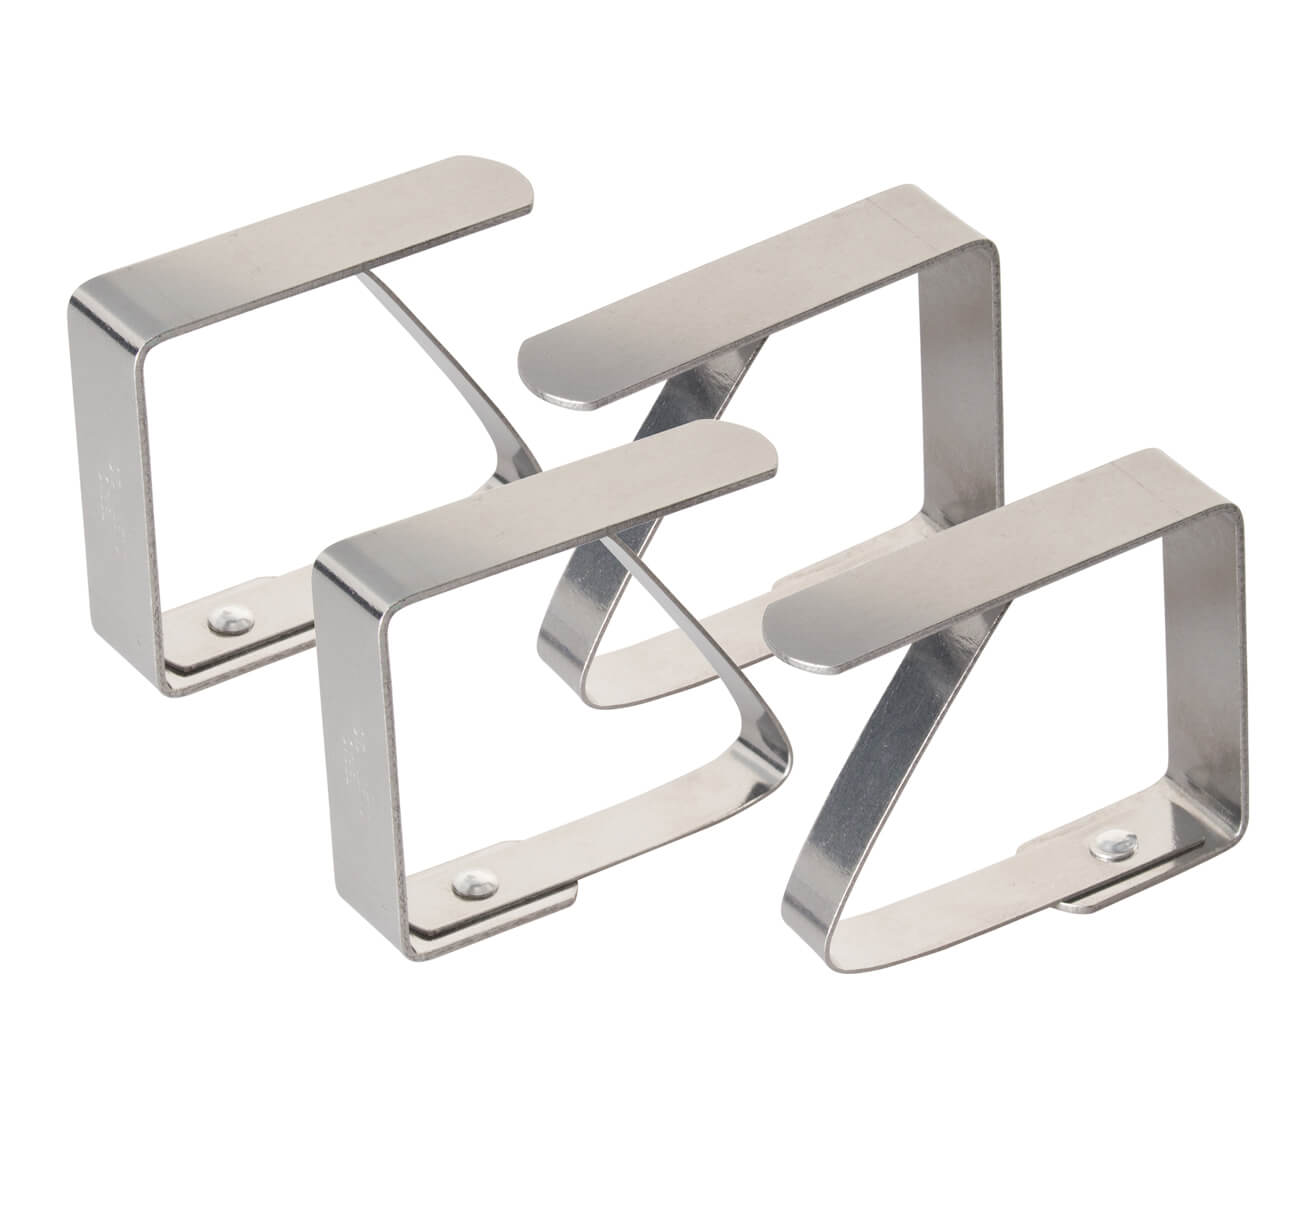 Tablecloth clips - stainless steel (4 pcs.)